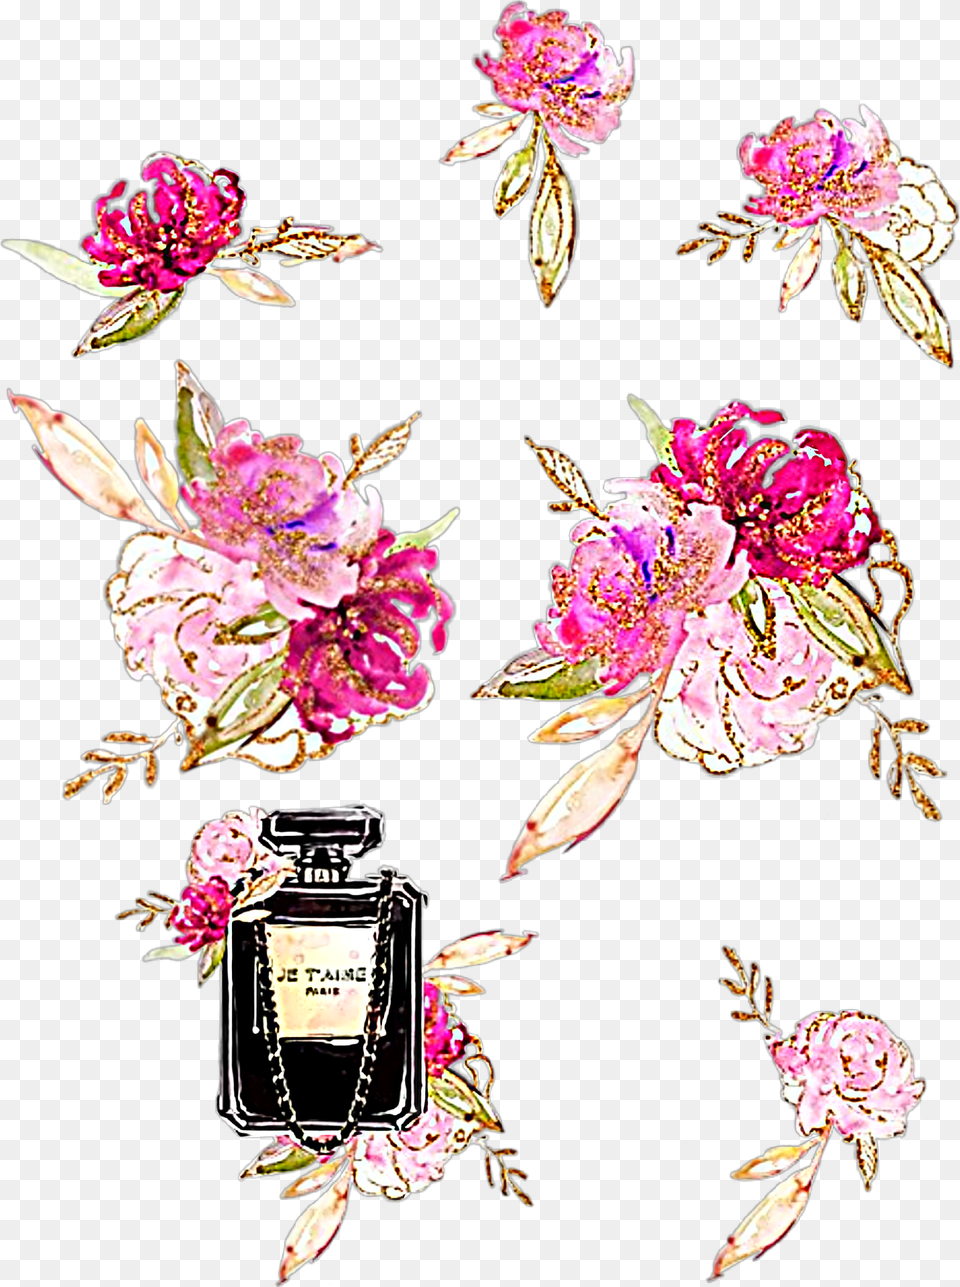 Watercolor Flowers Floral Bouquet Roses Lillies Watercolor Flowers Pink And Glitter, Art, Floral Design, Flower, Graphics Free Png